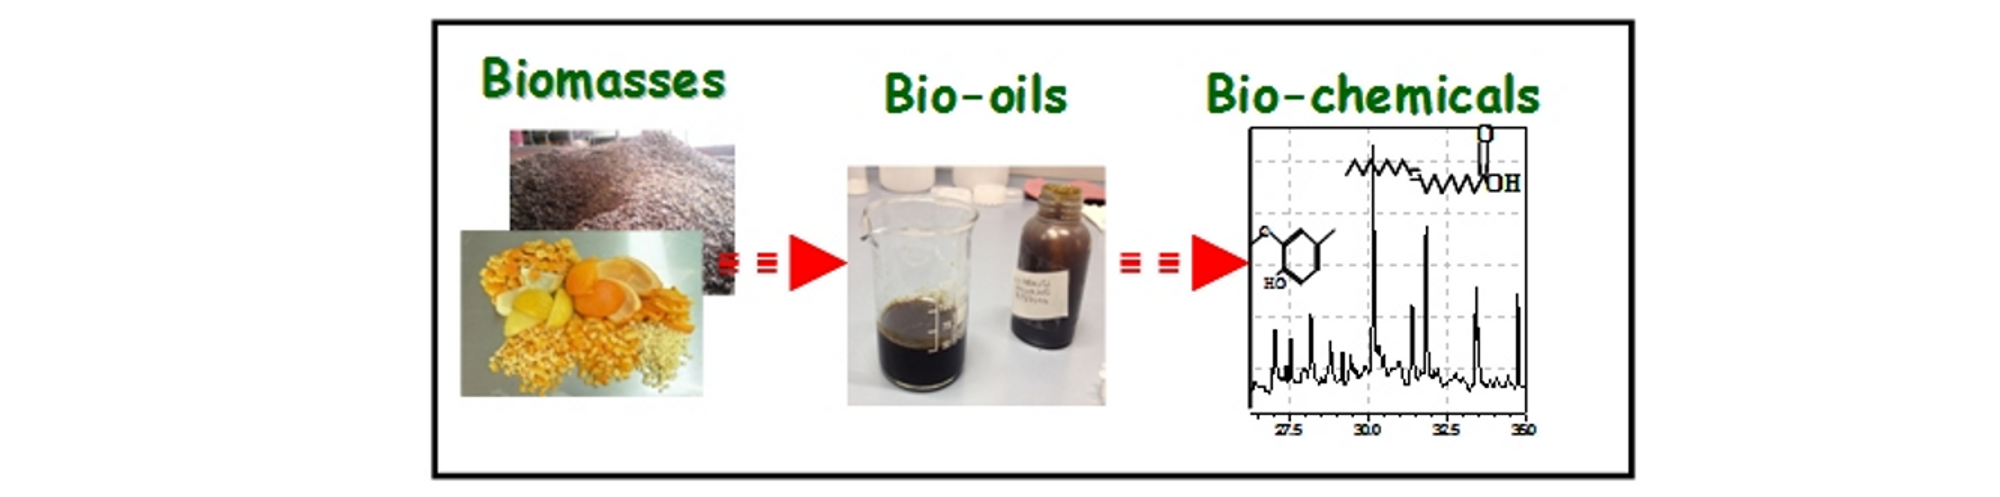 IPCB Catania Research: Chemicals from  agro-industrial waste